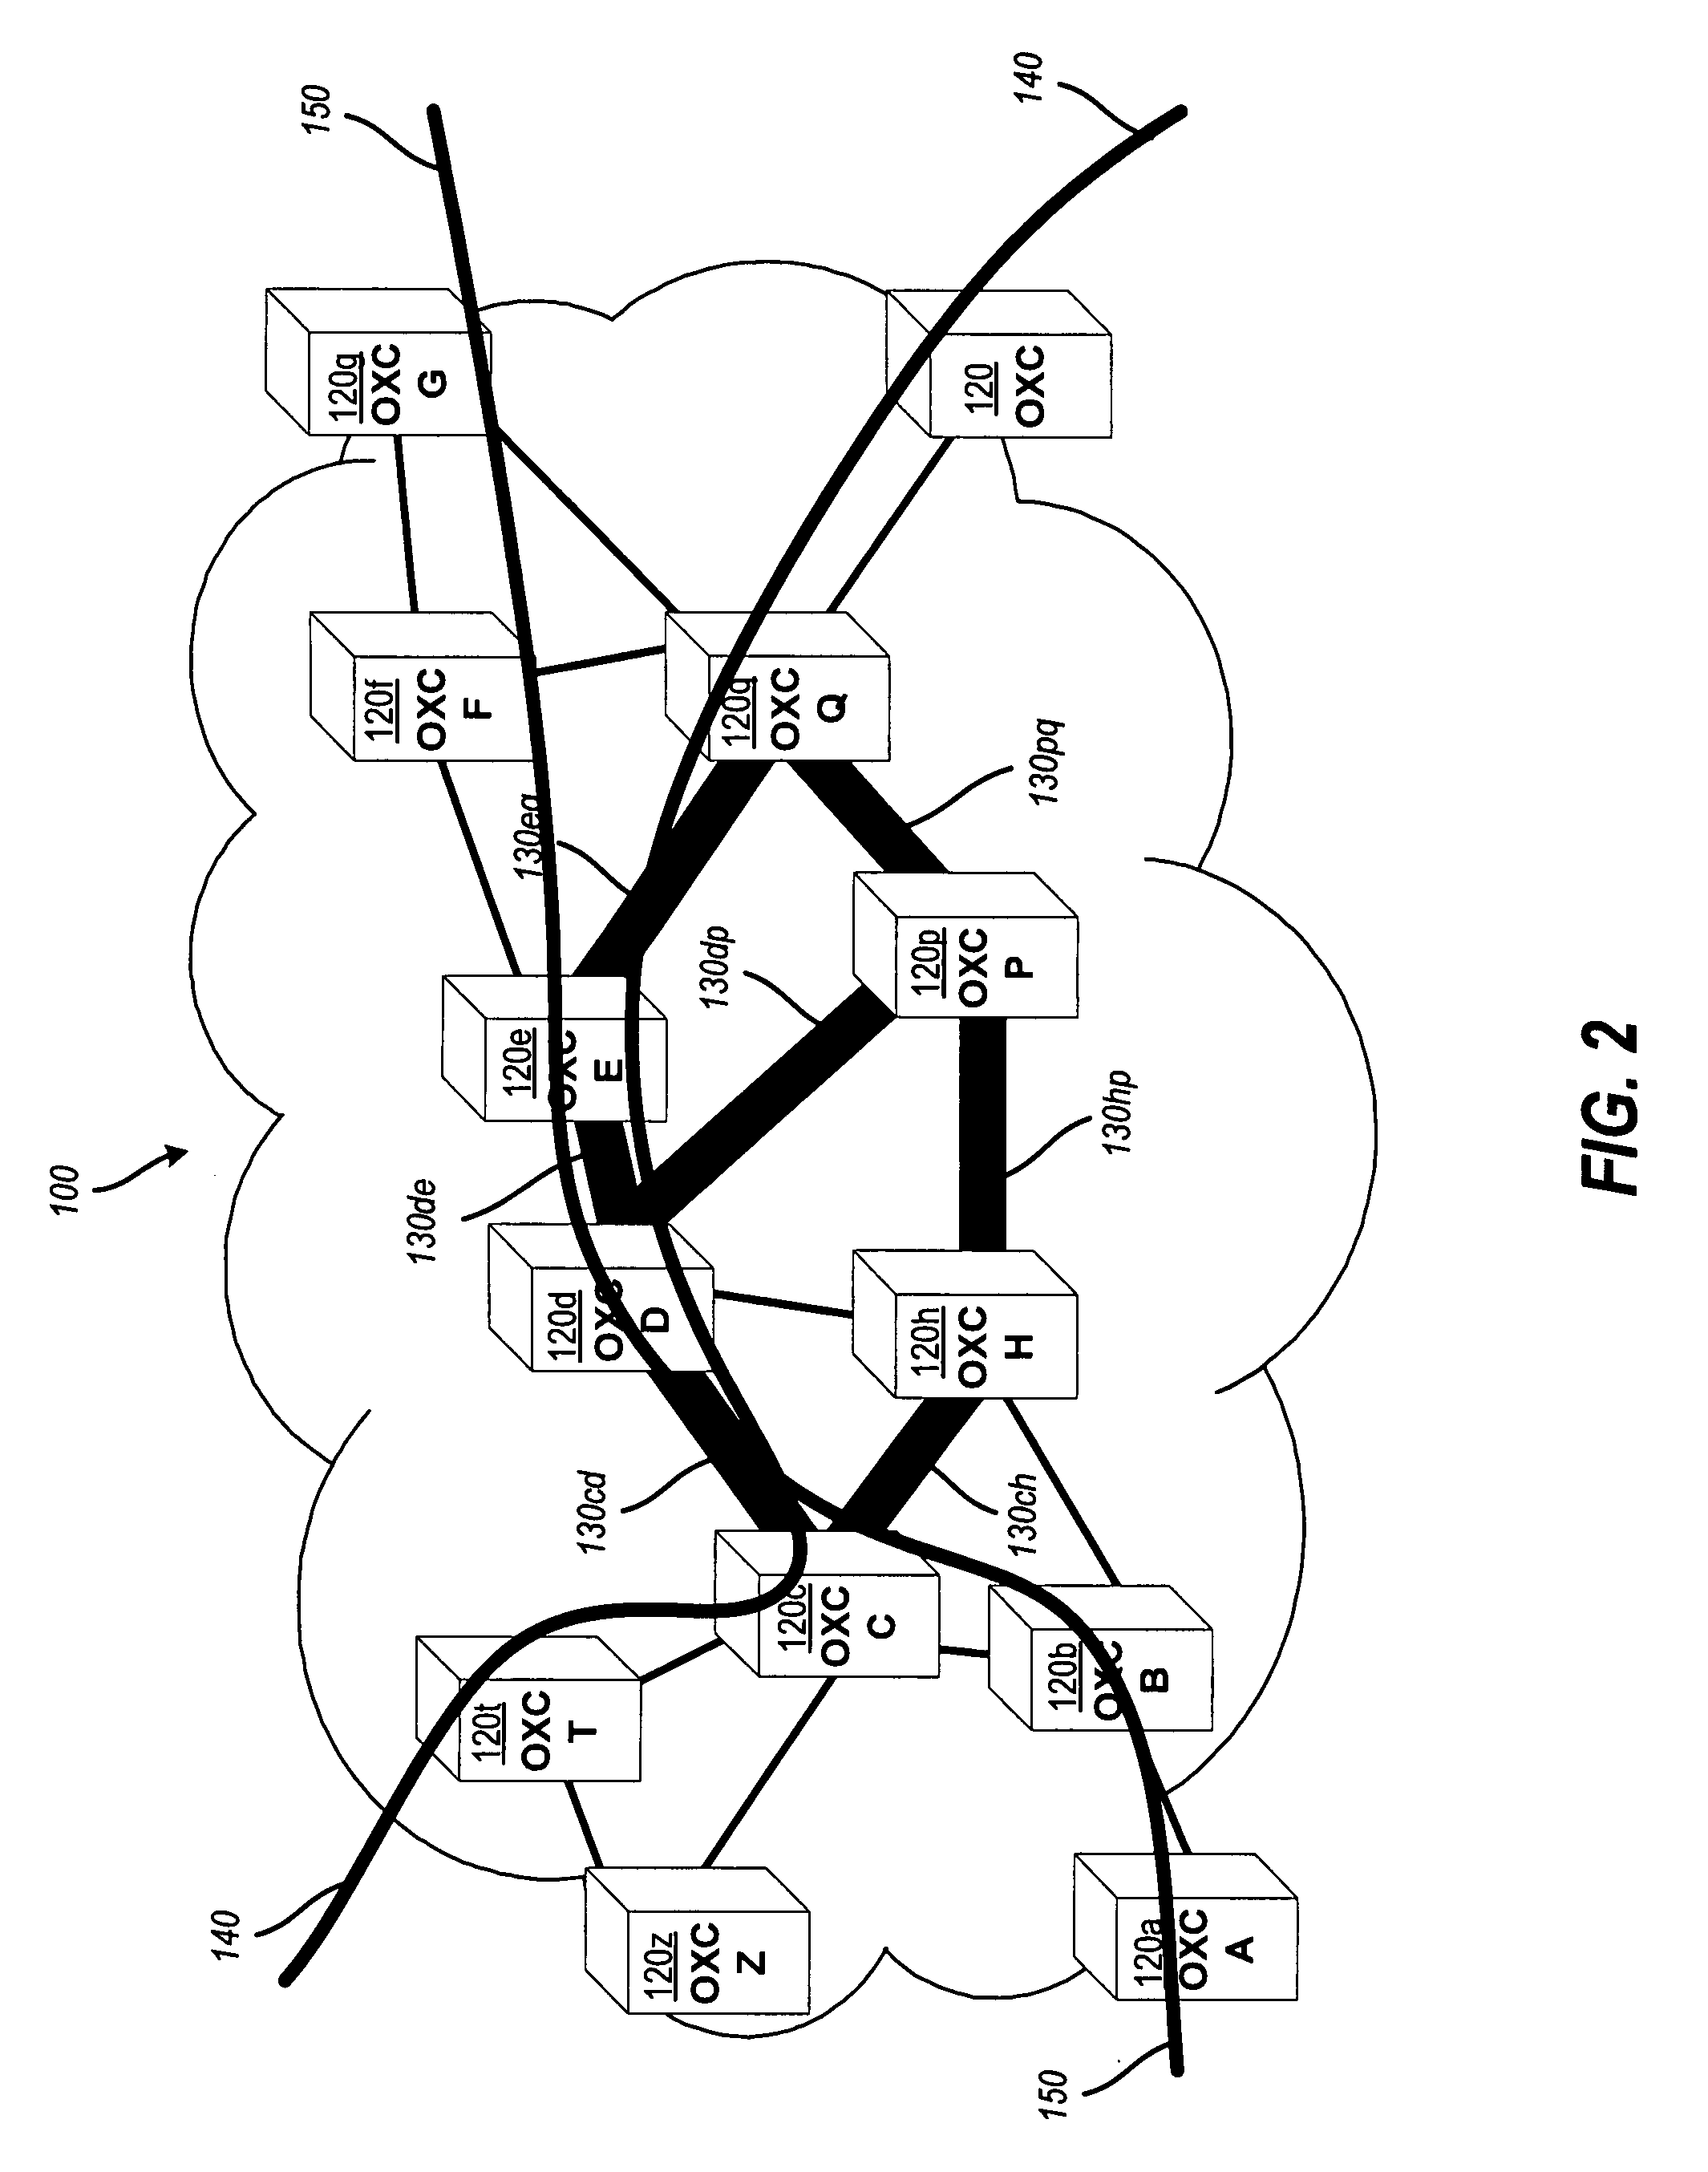 Method and system for span-based connection aggregation